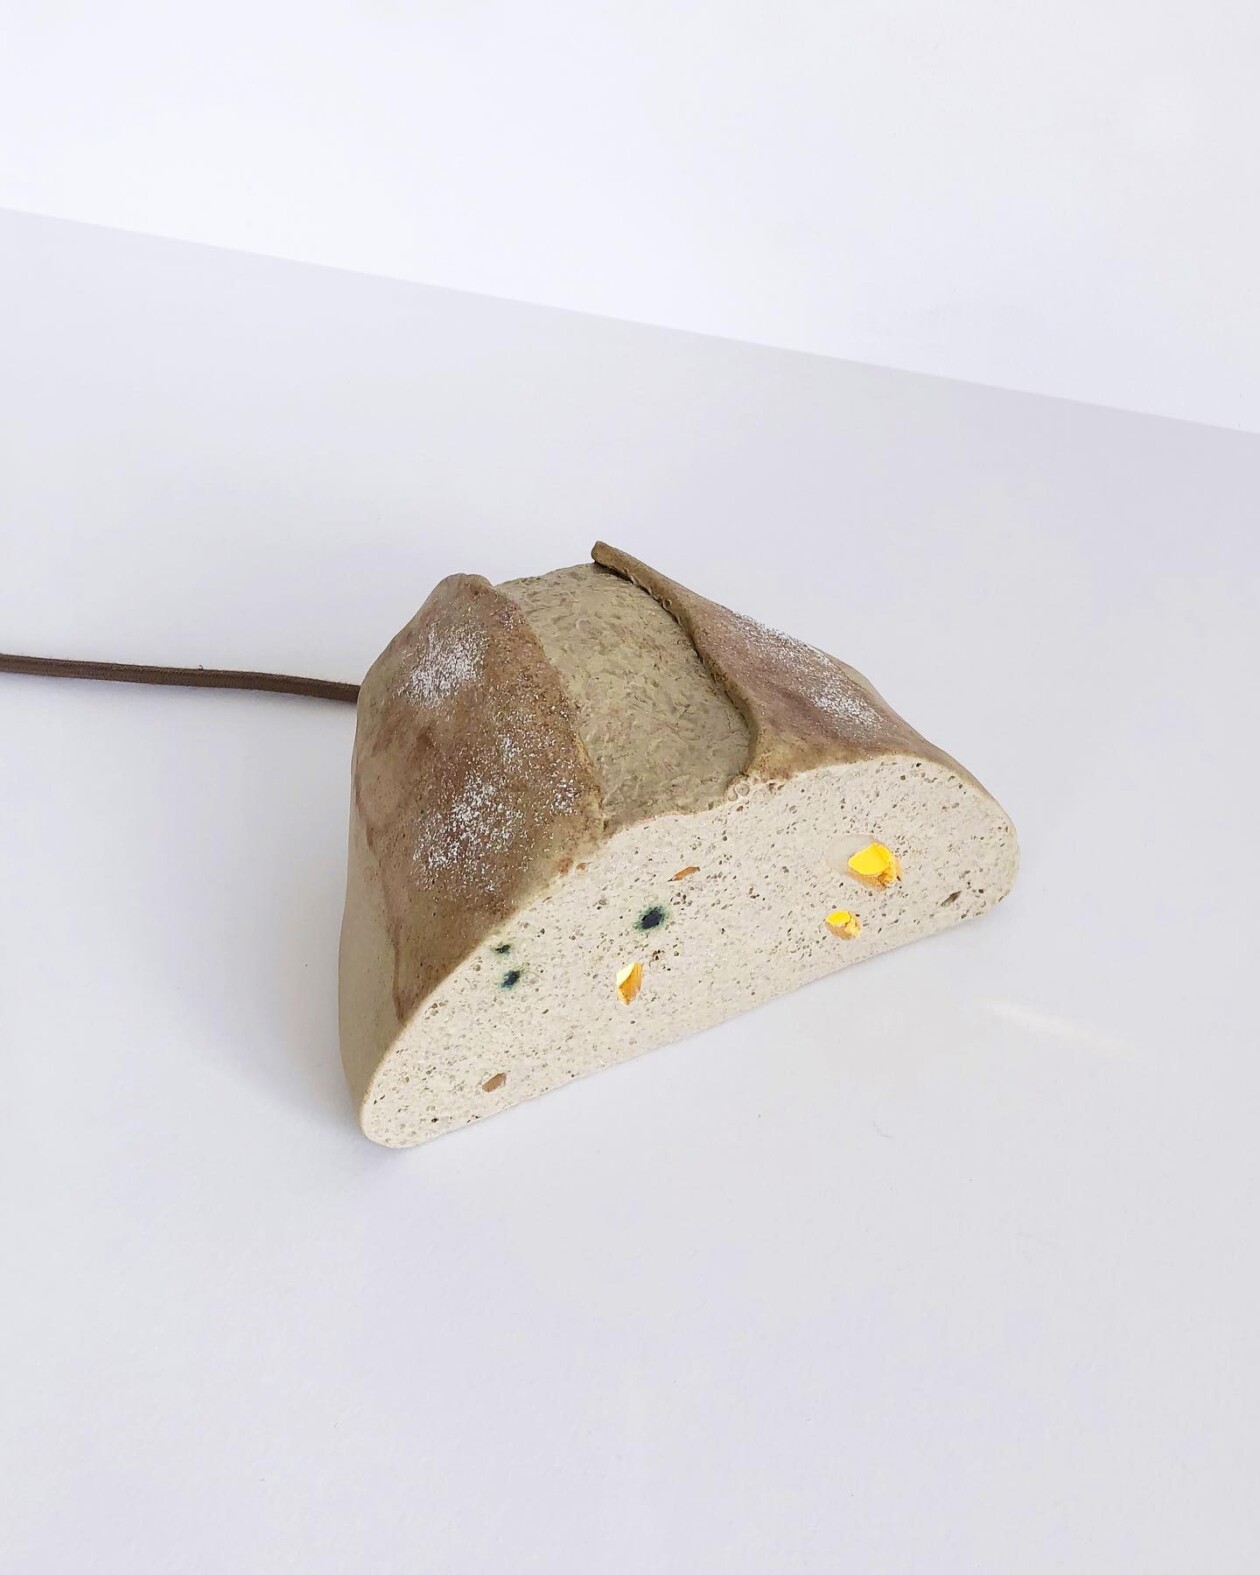 Food Based Ceramic Sculptures By Eléonore Joulin (7)